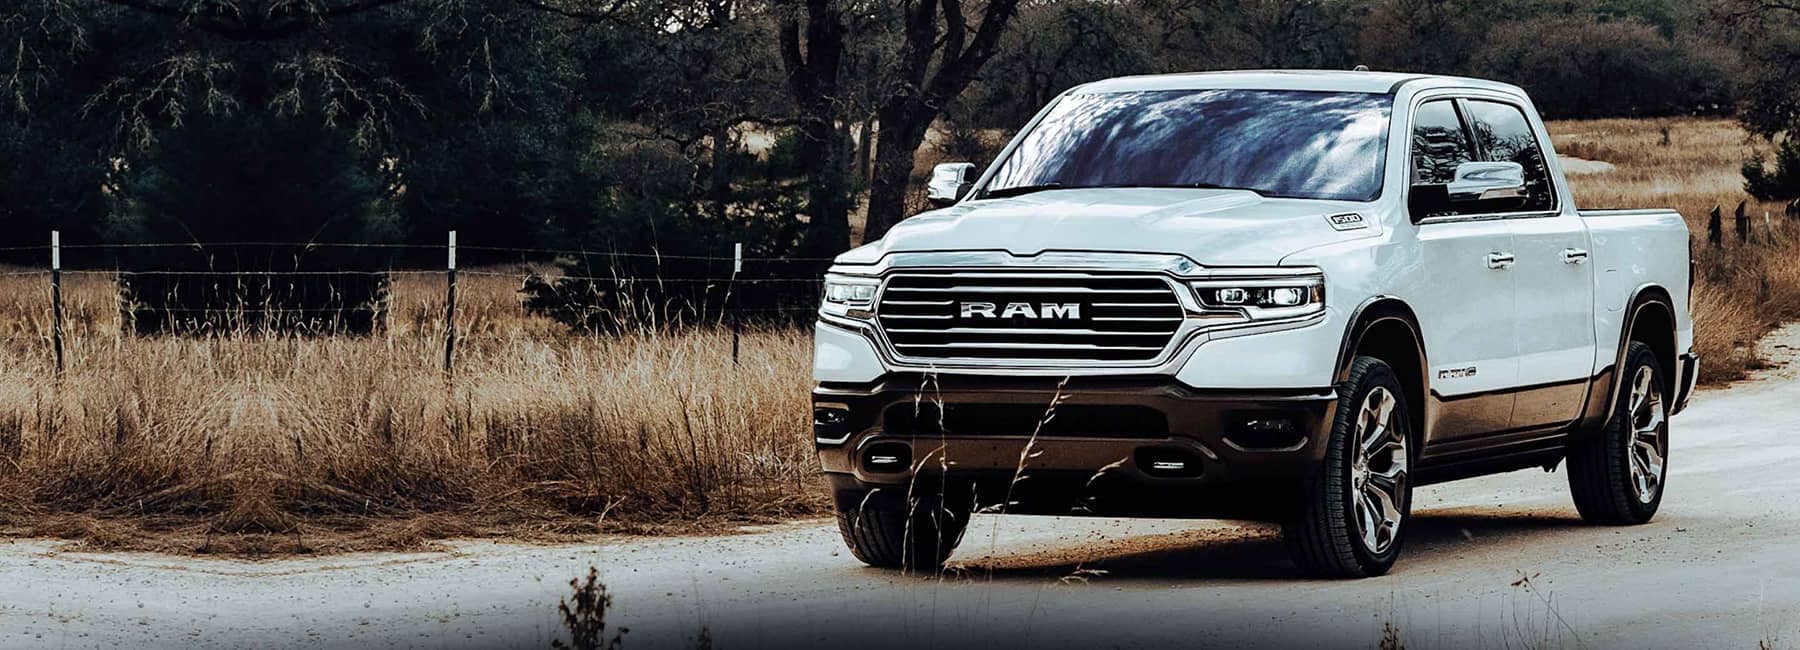 The 2022 Ram 1500 parked on a dirt road